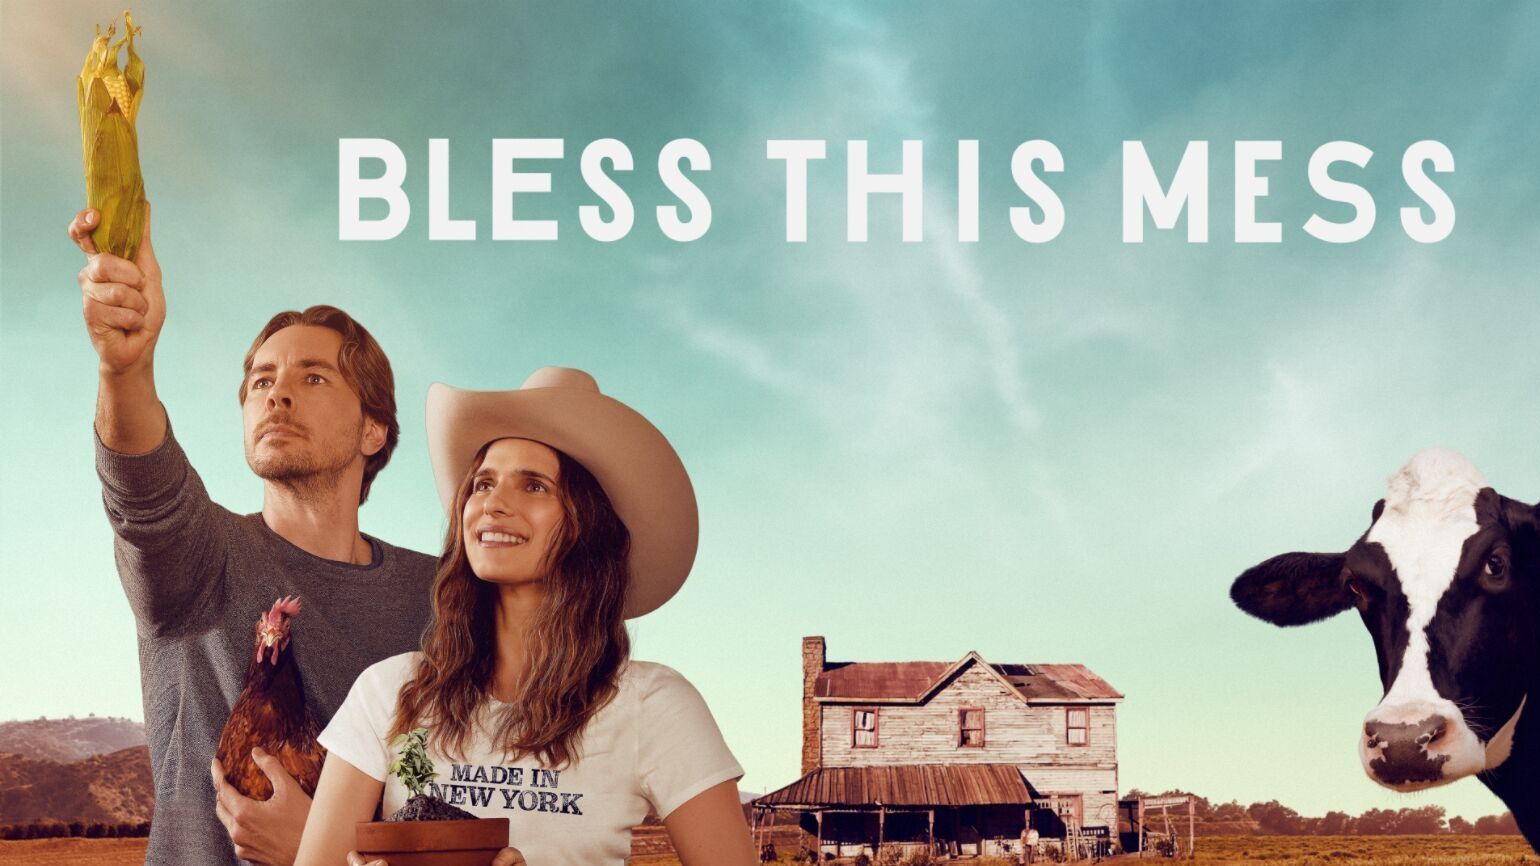 Bless This Mess poster